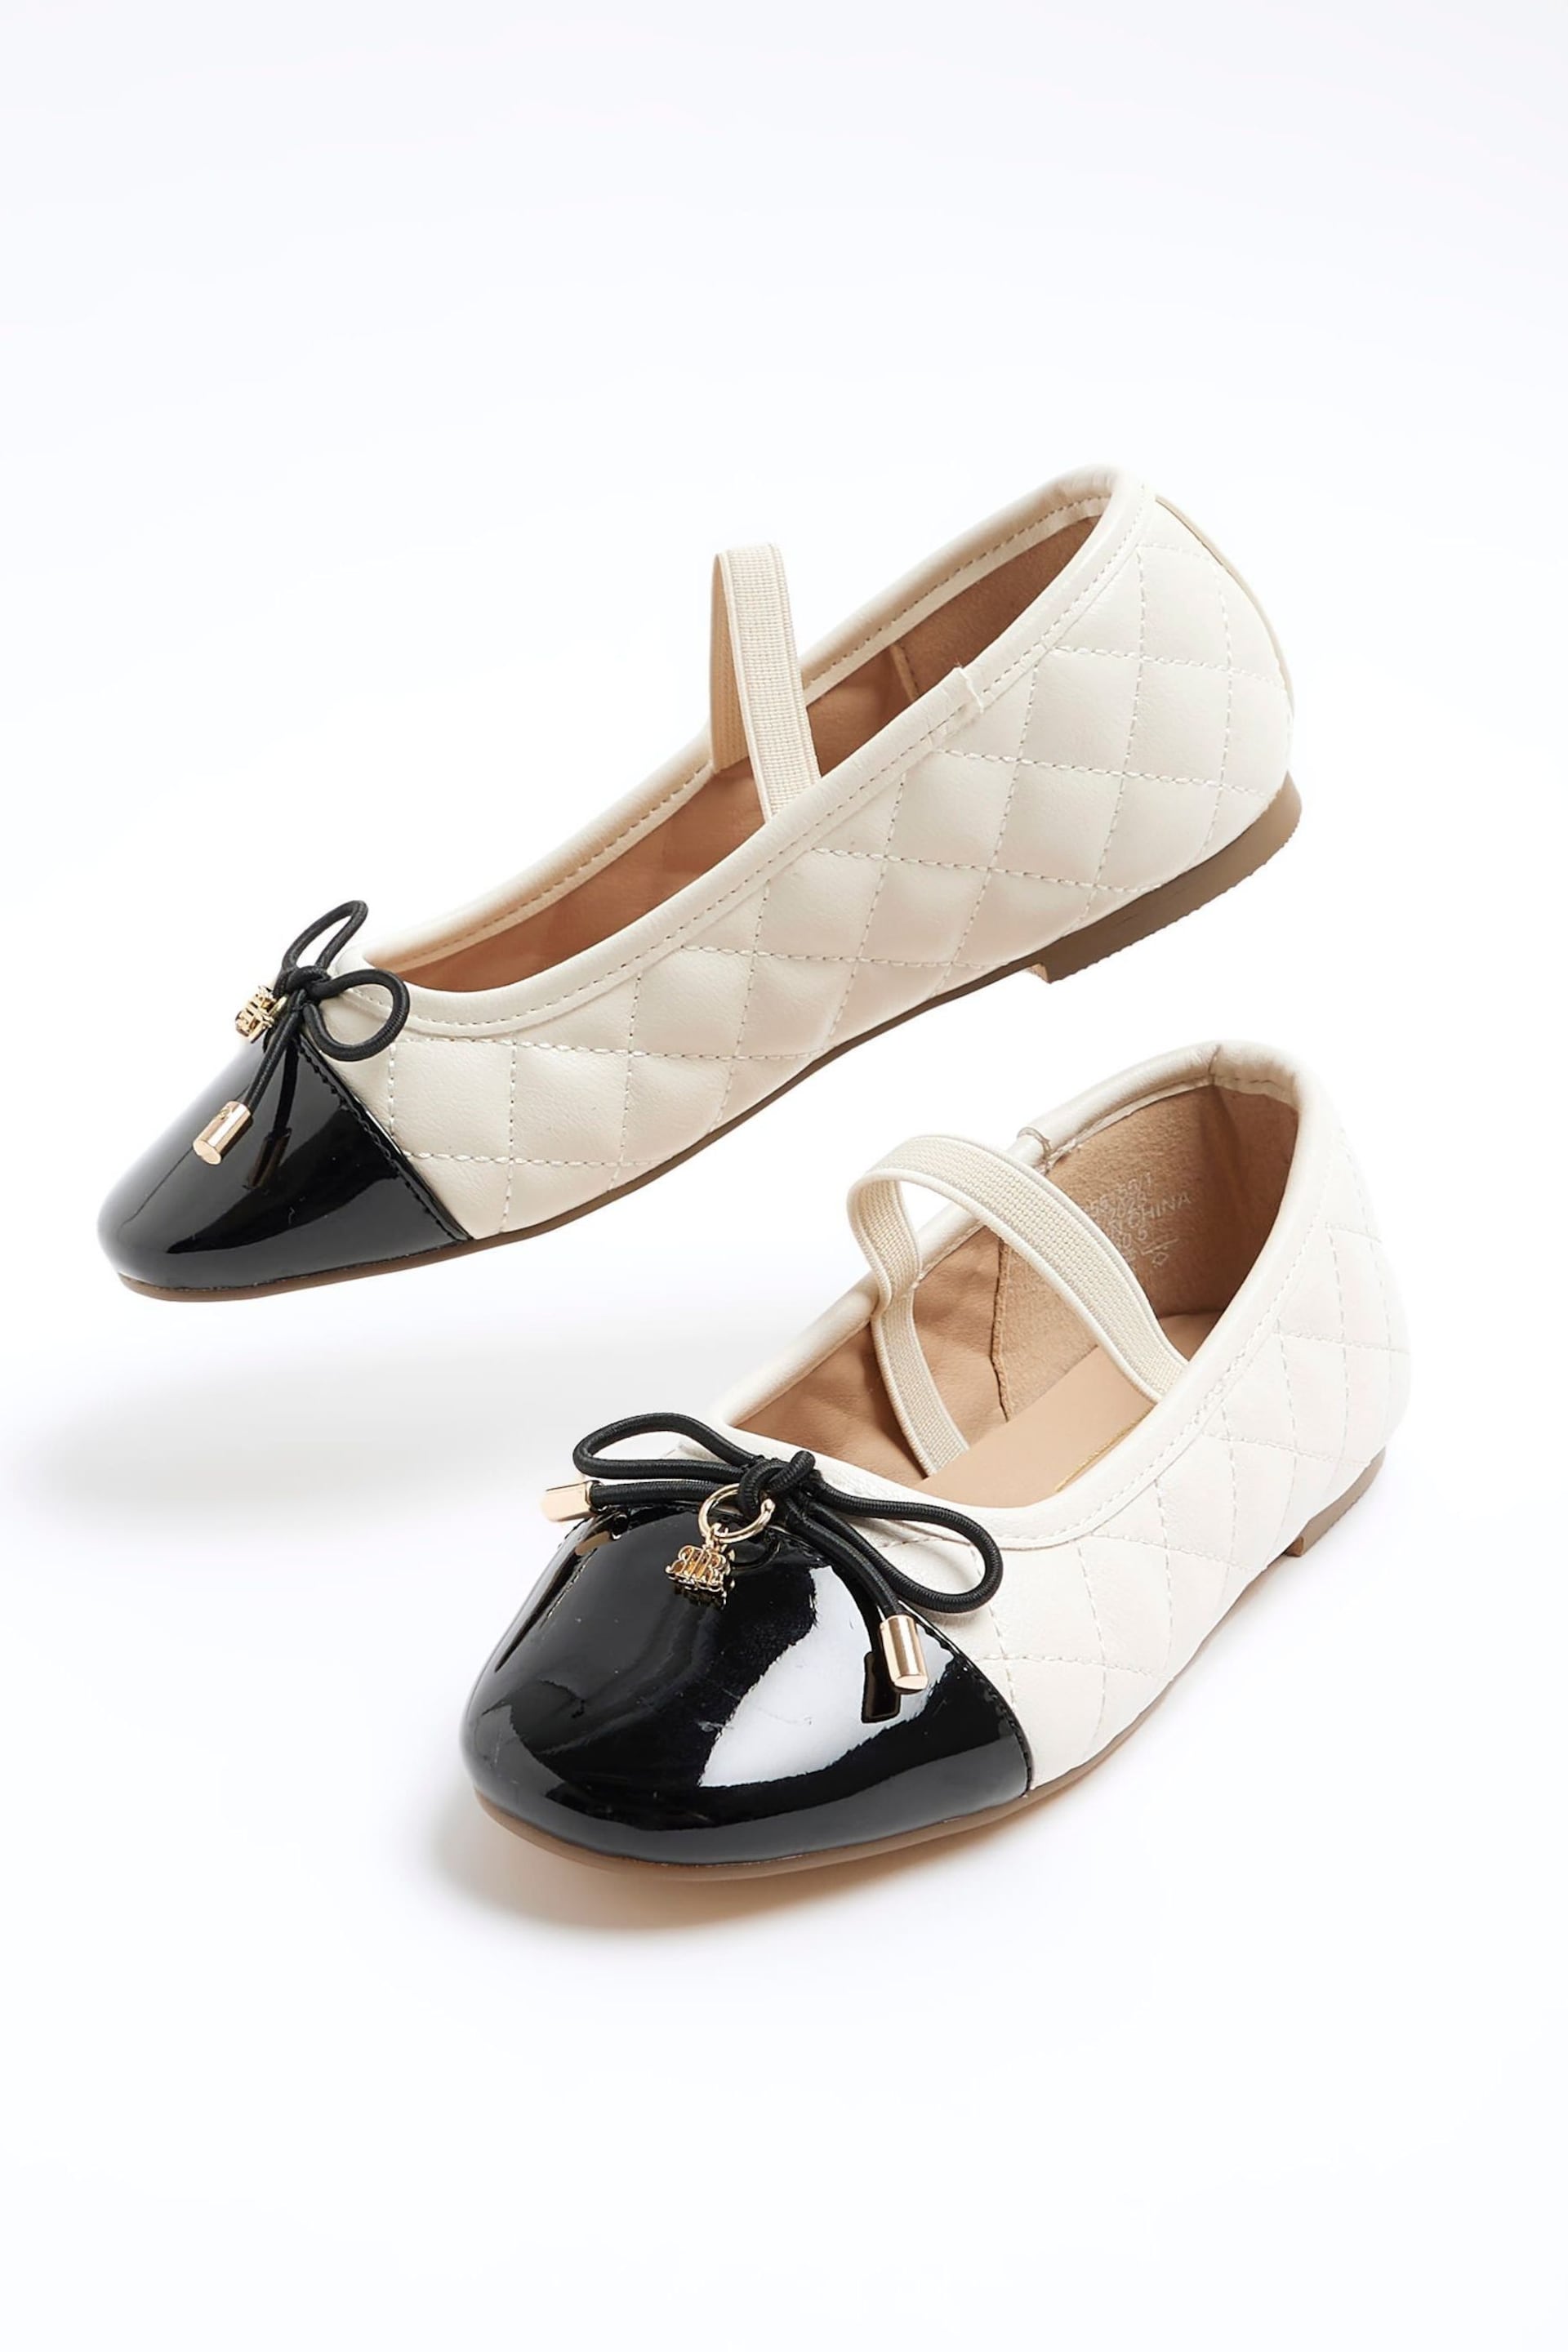 River Island Cream Girls Quilted Bow Ballerina - Image 2 of 4